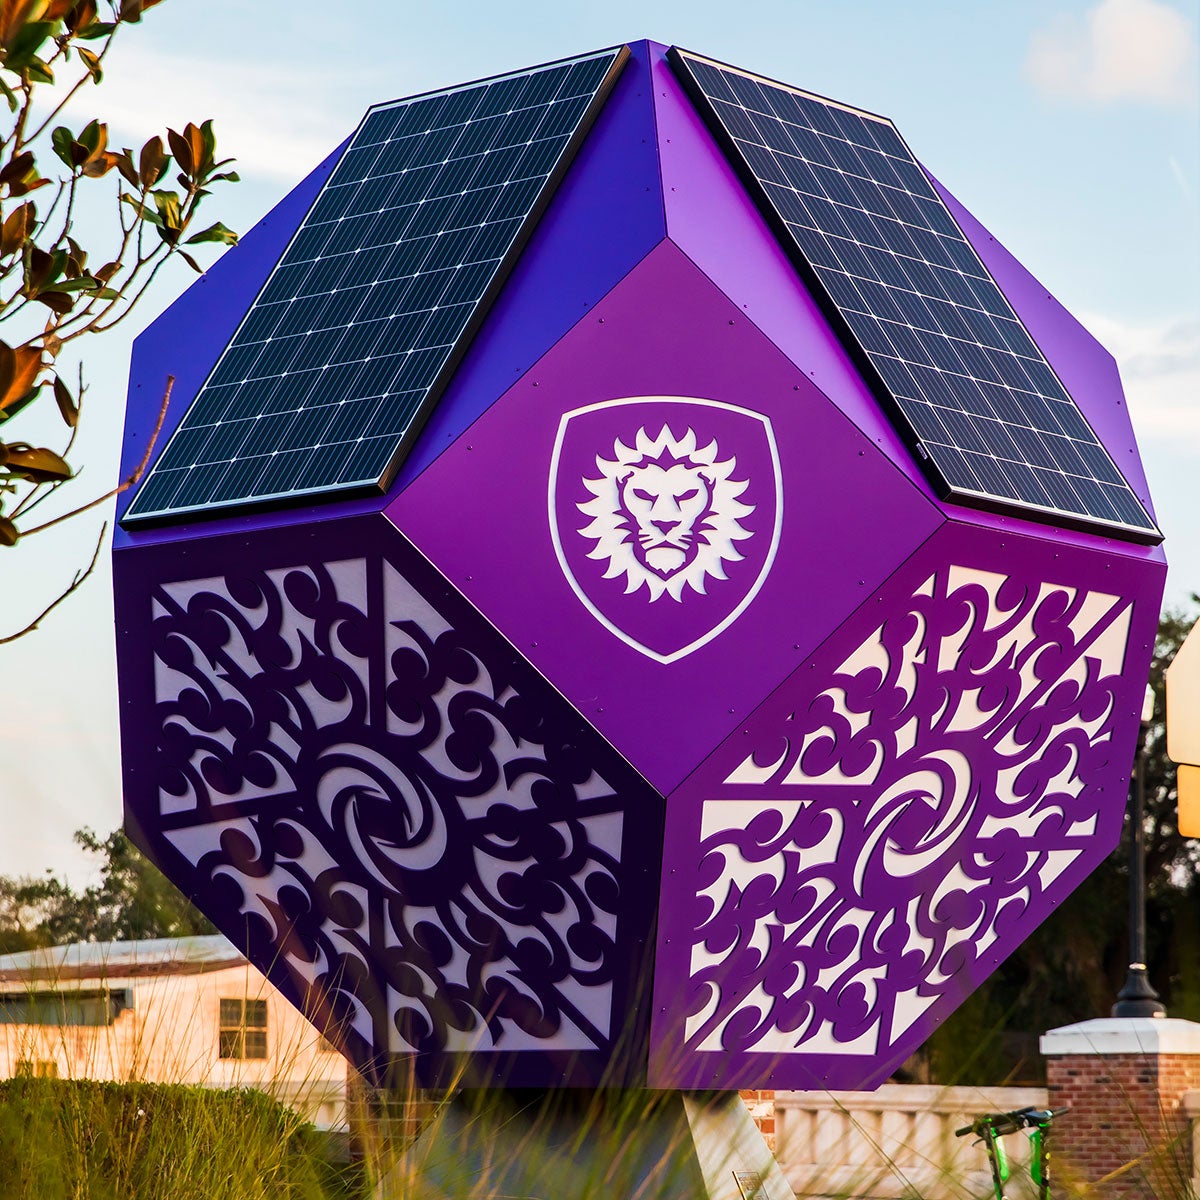 Two solar panels and intricate designs on the solar sculpture.